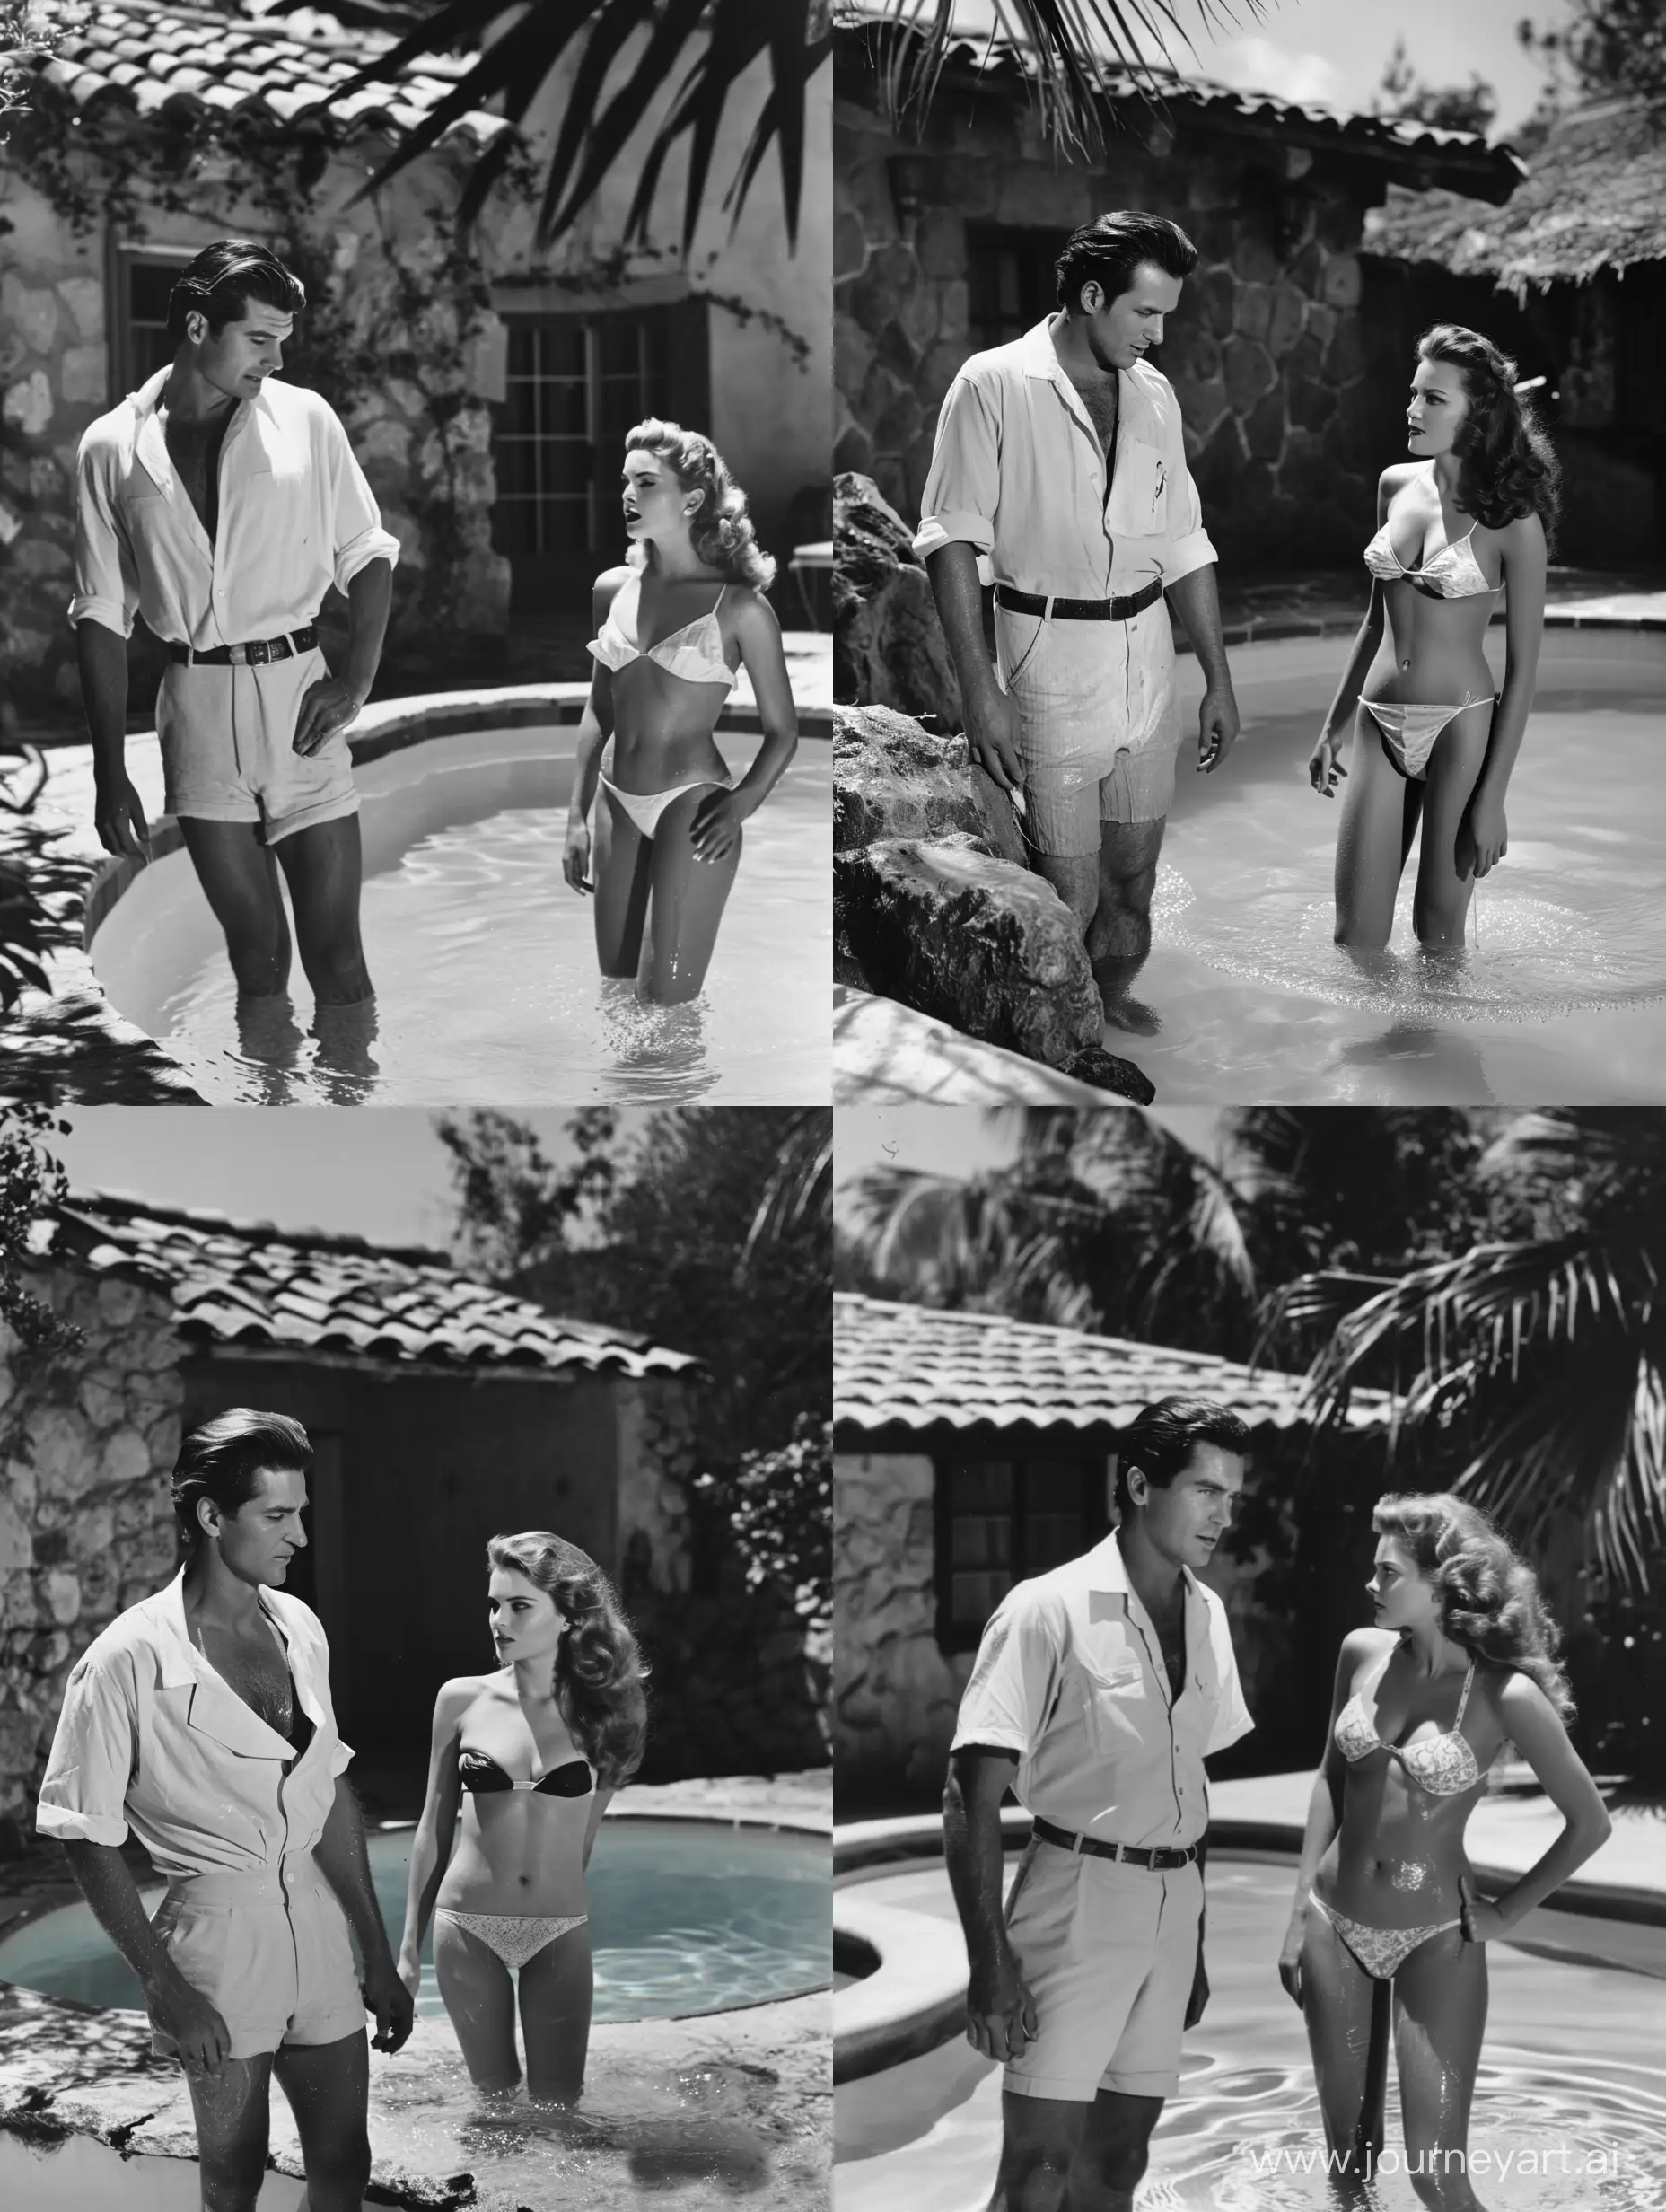 Film noir shot of a vintage 1940s handsome movie star man wearing a white shirt
standing beside a pool in a villa a yard, with a pretty 1940s female fatale woman wearing vintage
1940s bikini and soaking wet emerging from the pool, both looking at each other